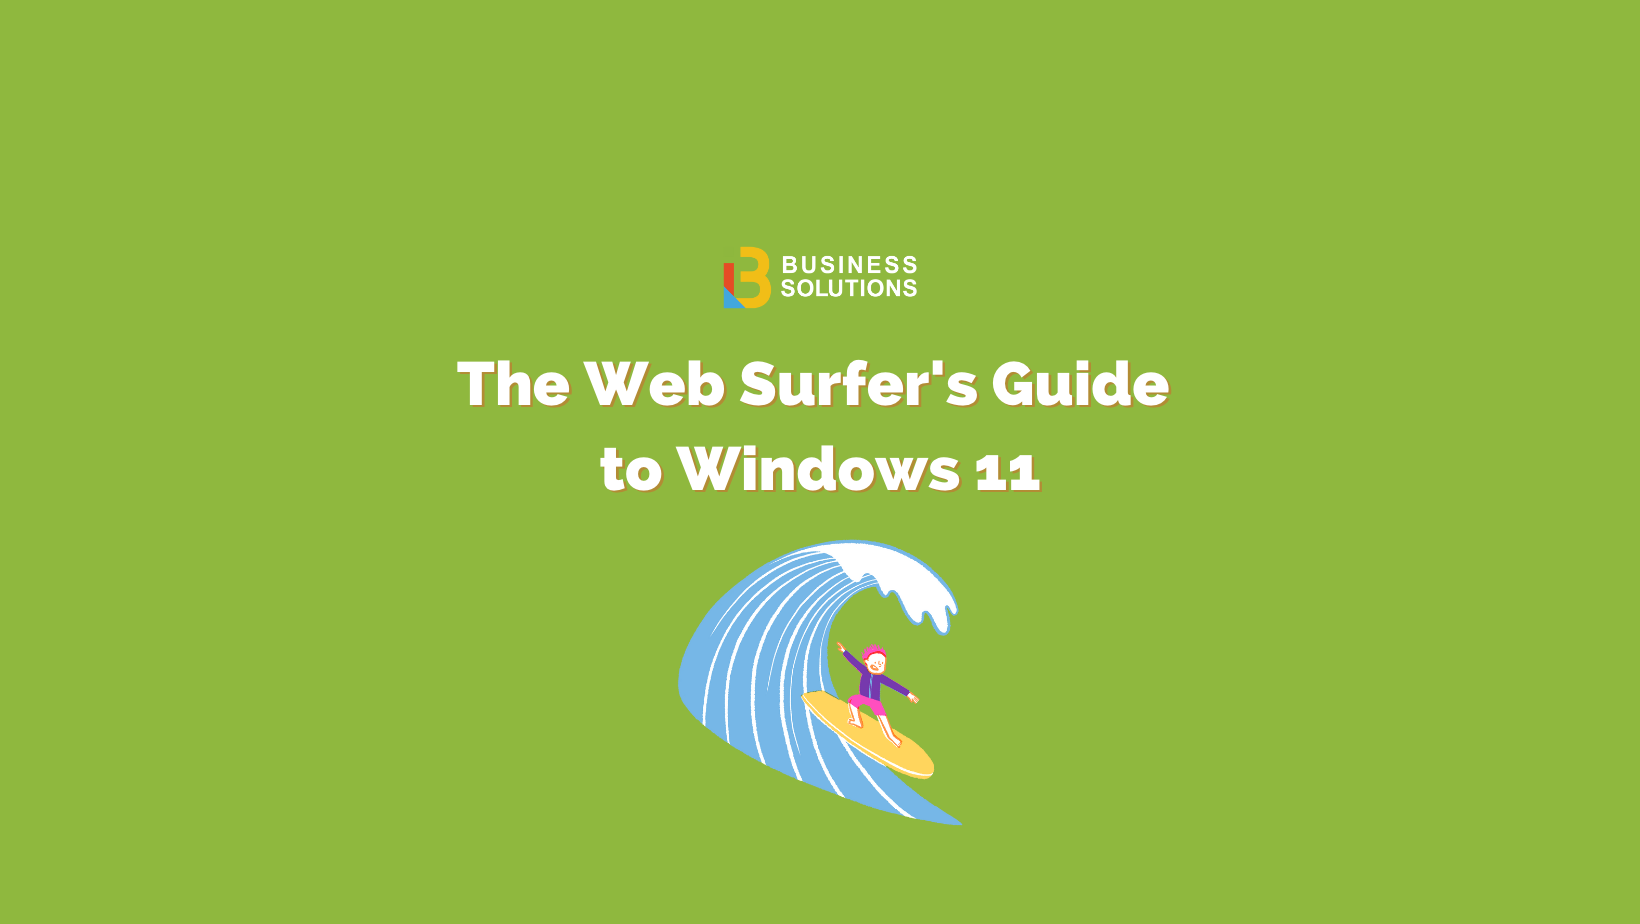 The Web Surfer's Guide to Windows 11